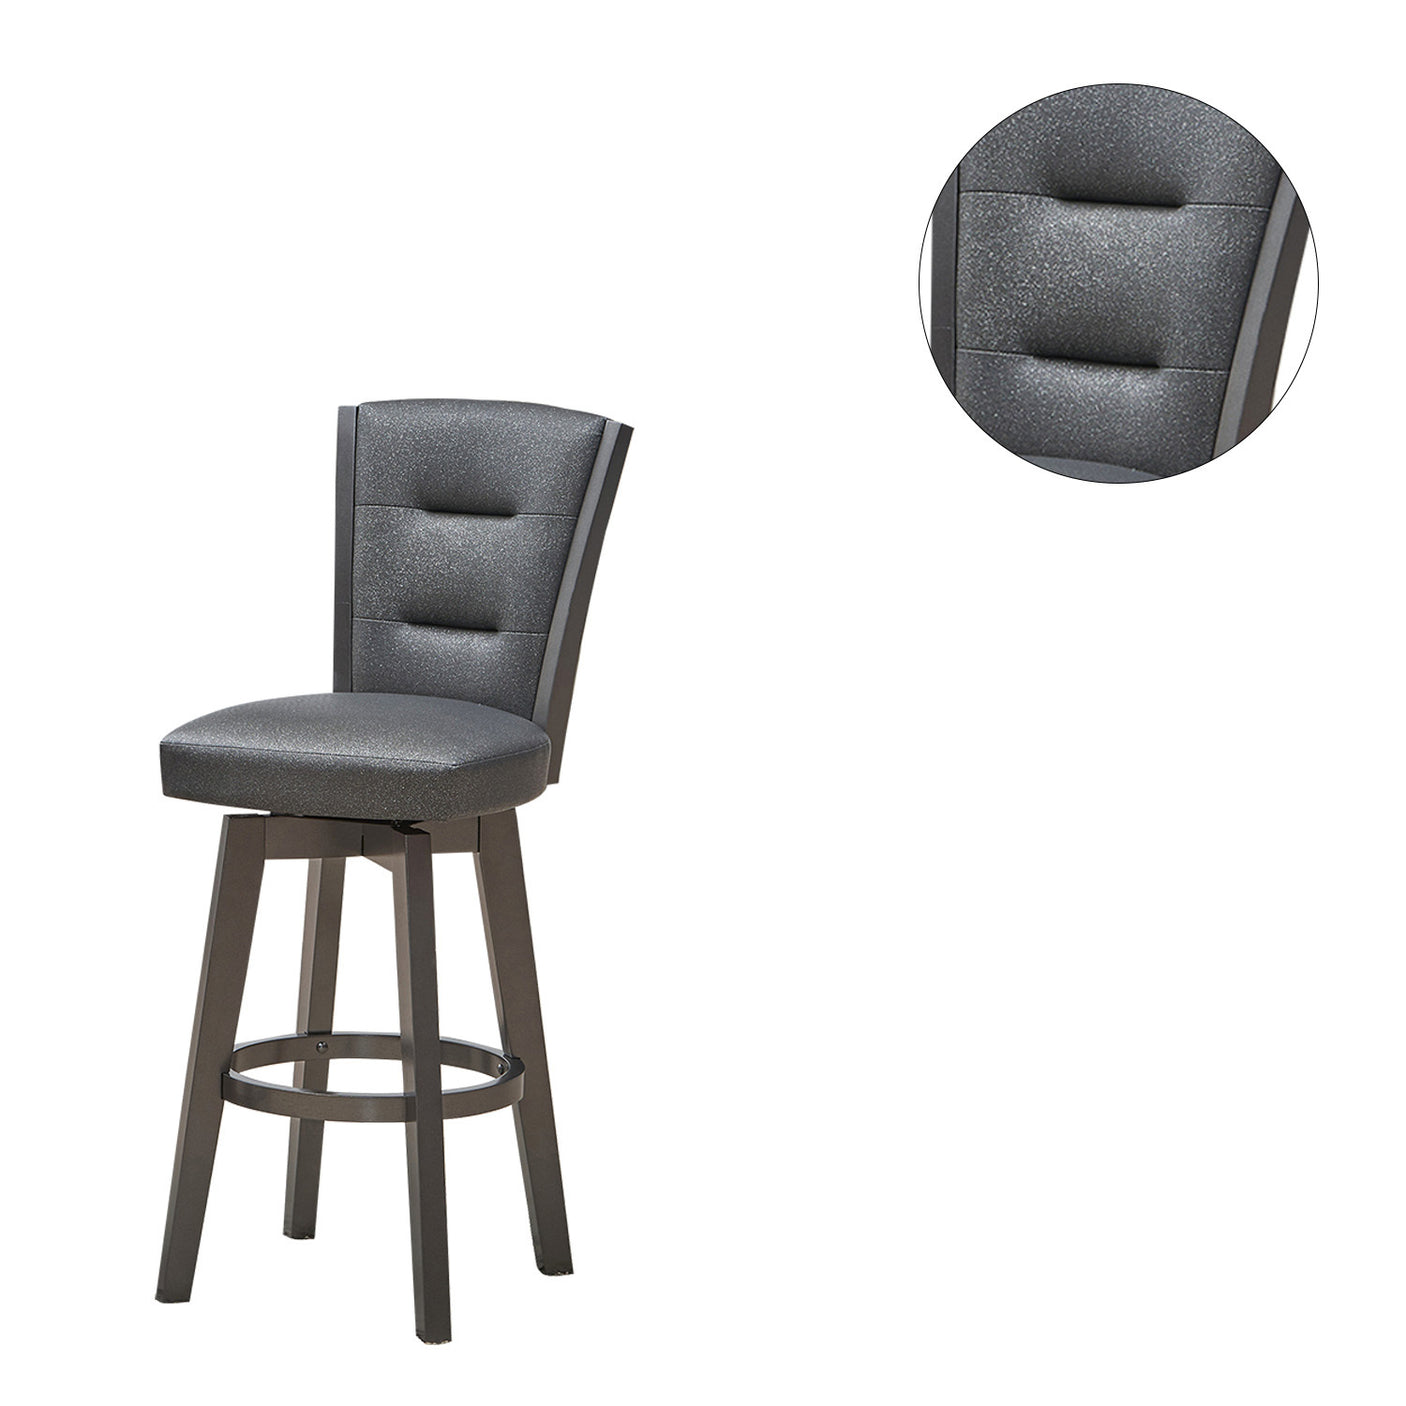 29" Seat Height Glitter Grey Faux Leather Bar Chairs, Set of 2 - Home Elegance USA